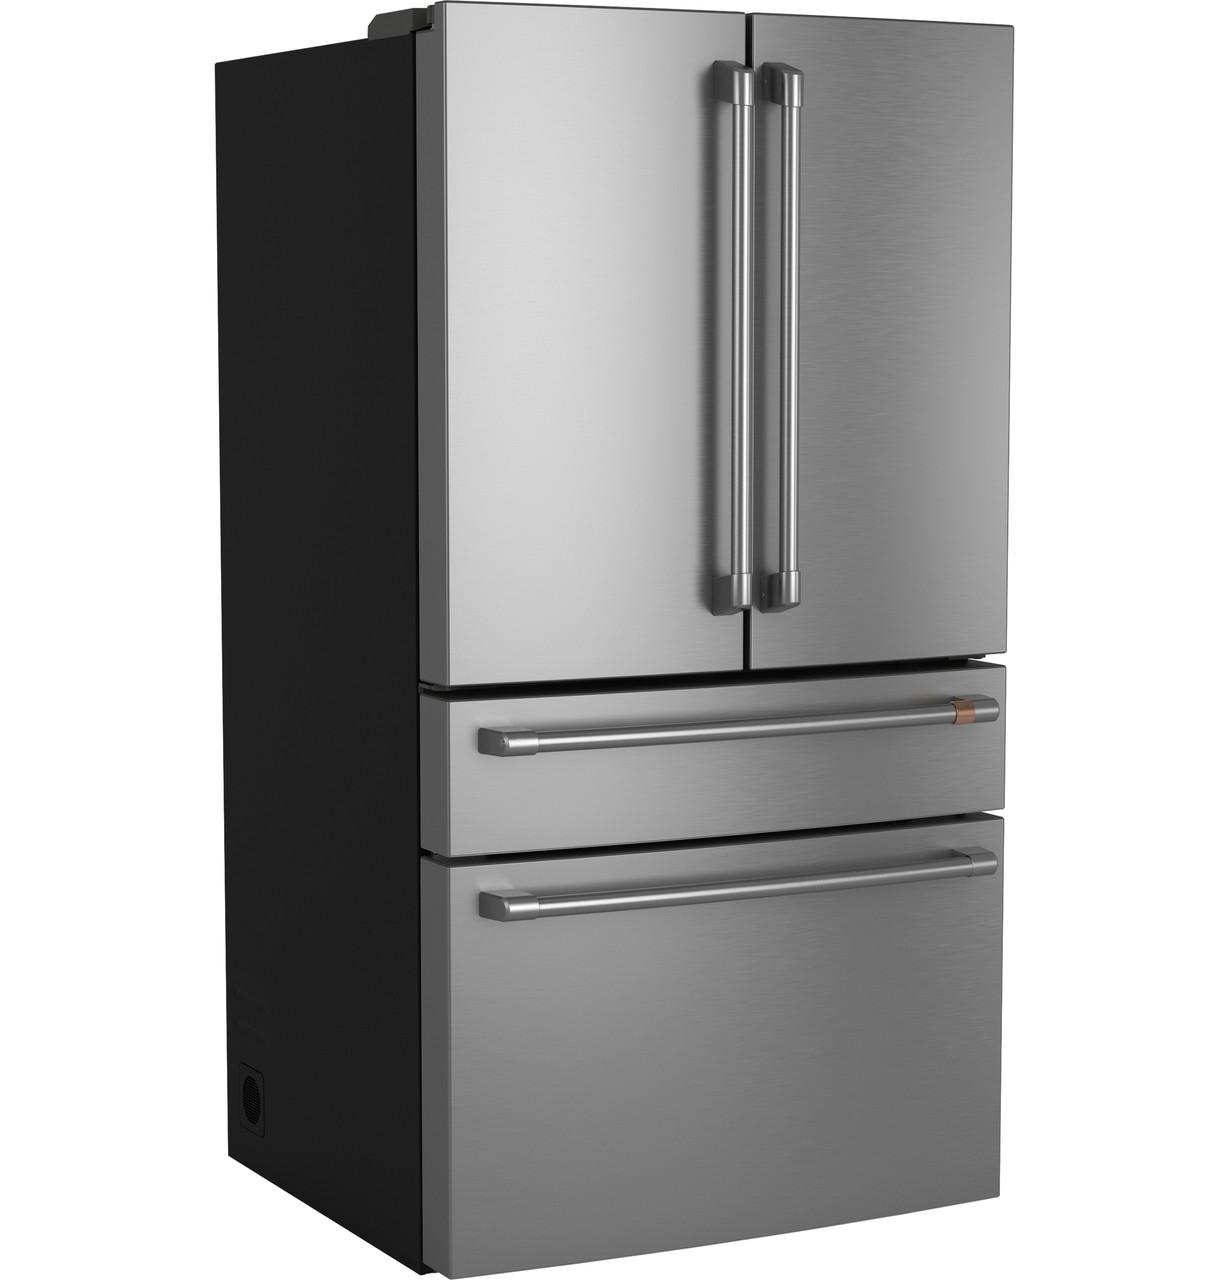 Cafe Caf(eback)™ ENERGY STAR® 28.7 Cu. Ft. Smart 4-Door French-Door Refrigerator With Dual-Dispense AutoFill Pitcher